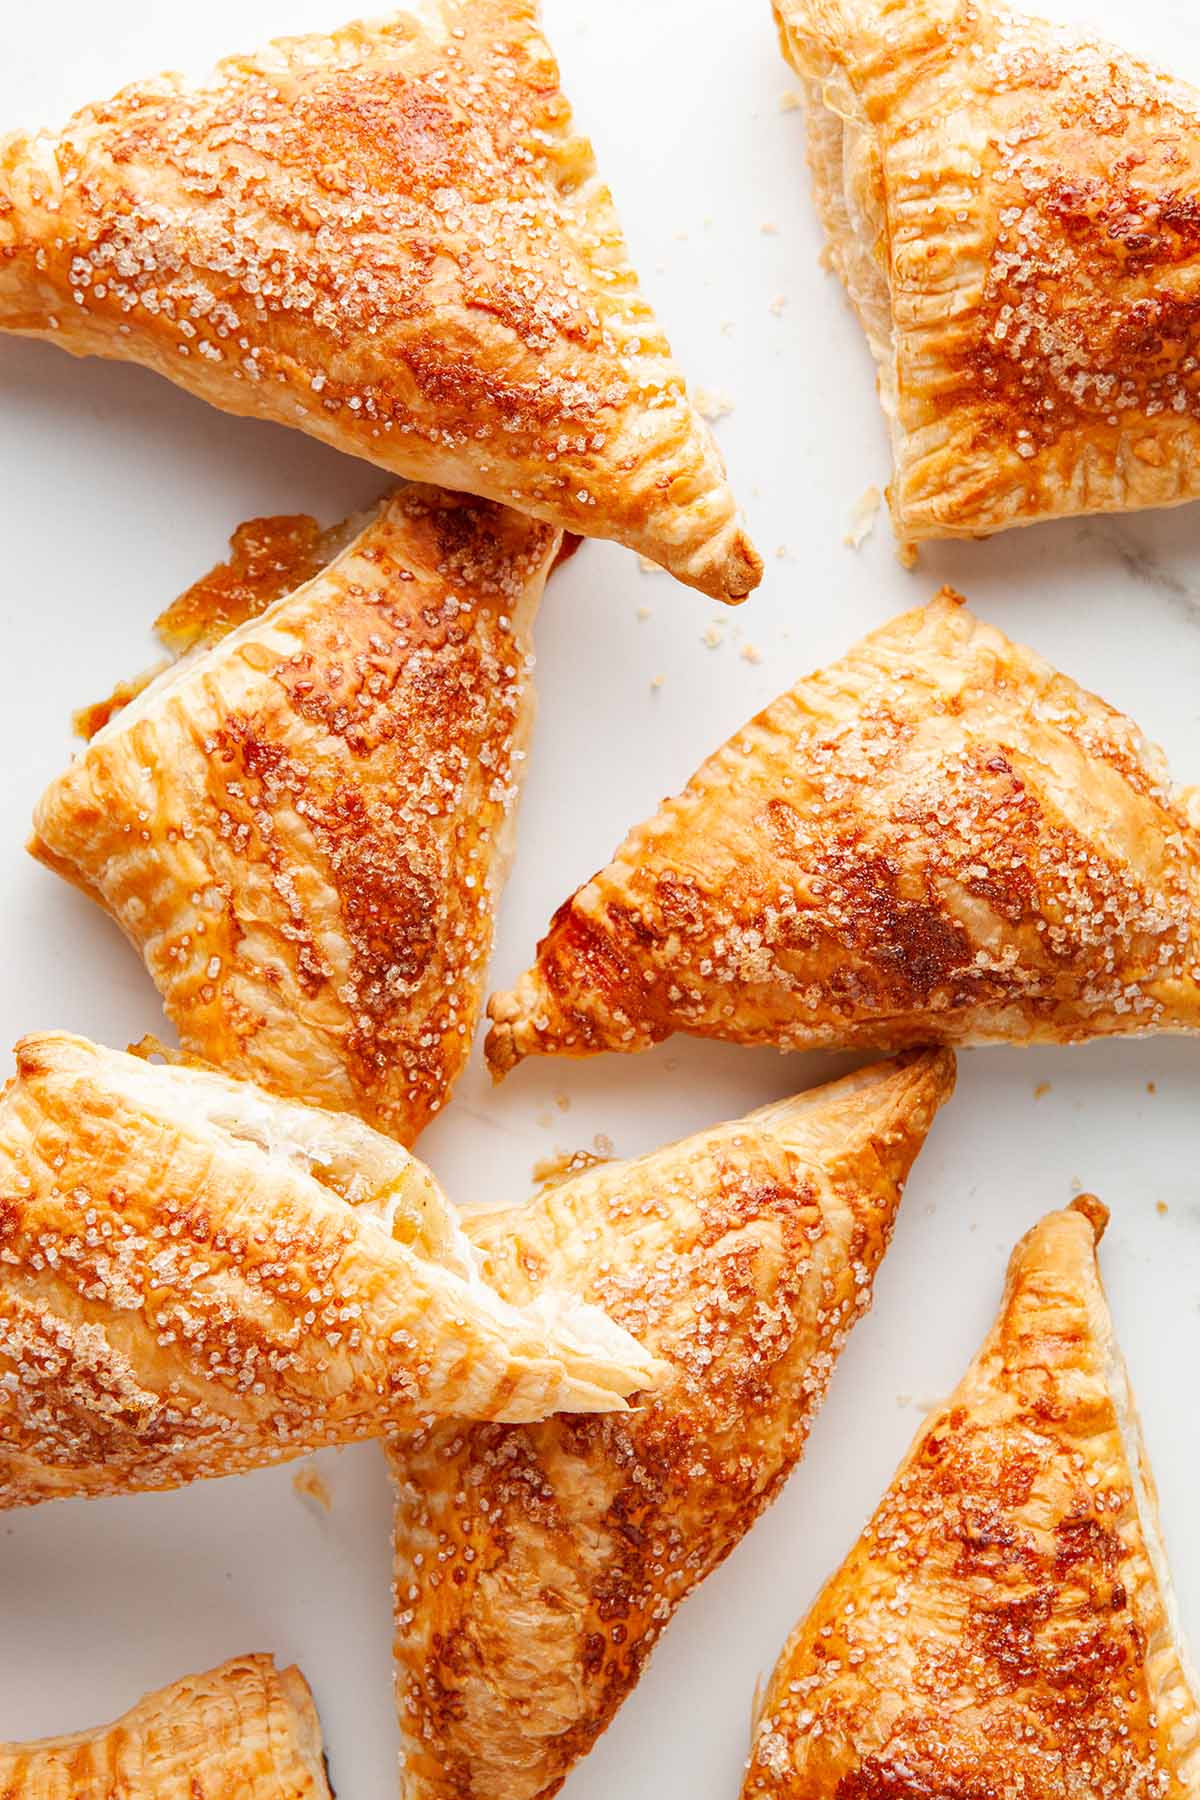 Several peach turnovers piled together on a light background.